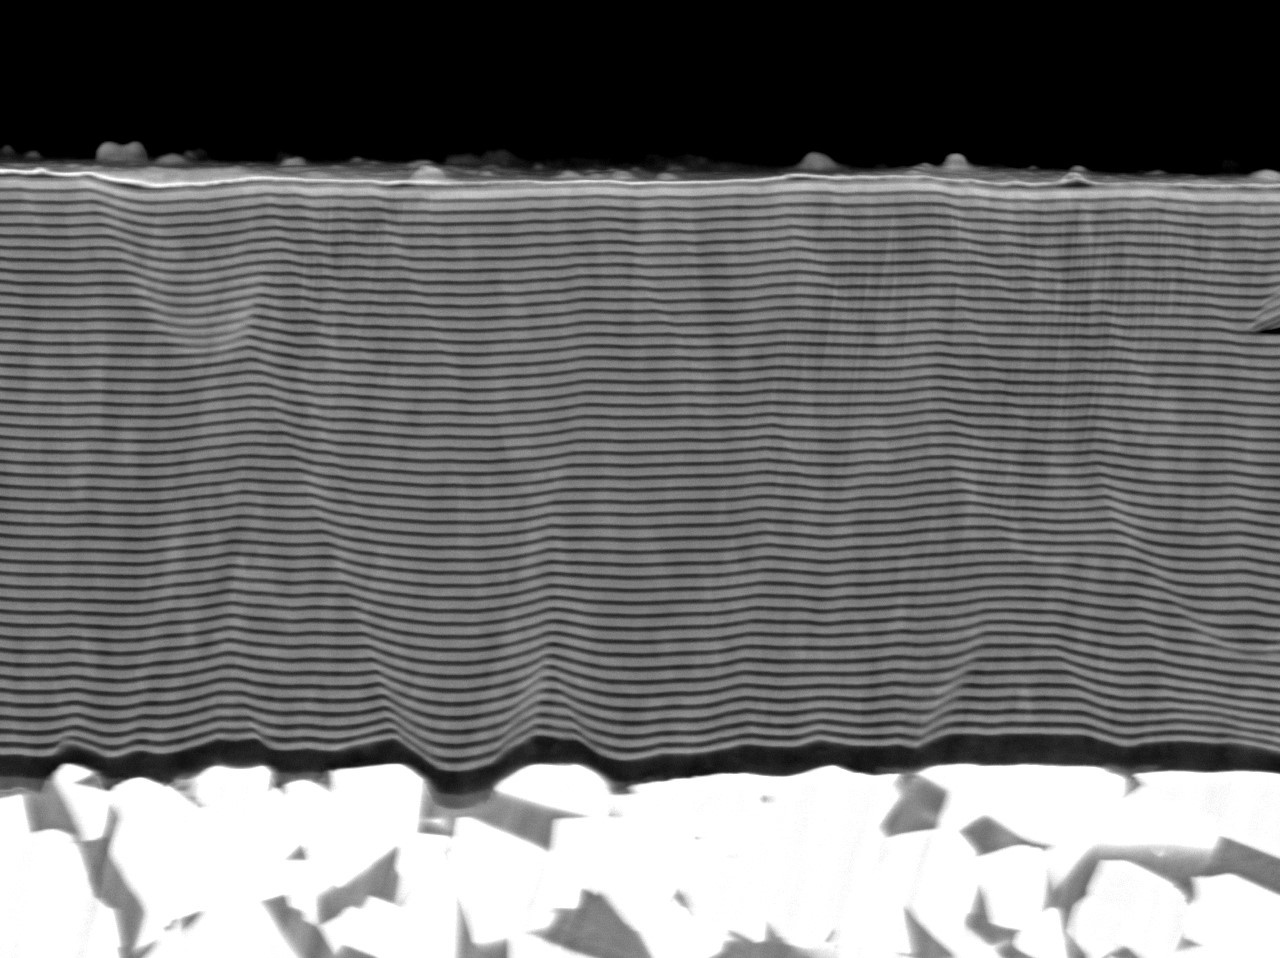 Ion cross section through a multilayer coating system in the scanning electron microscope.